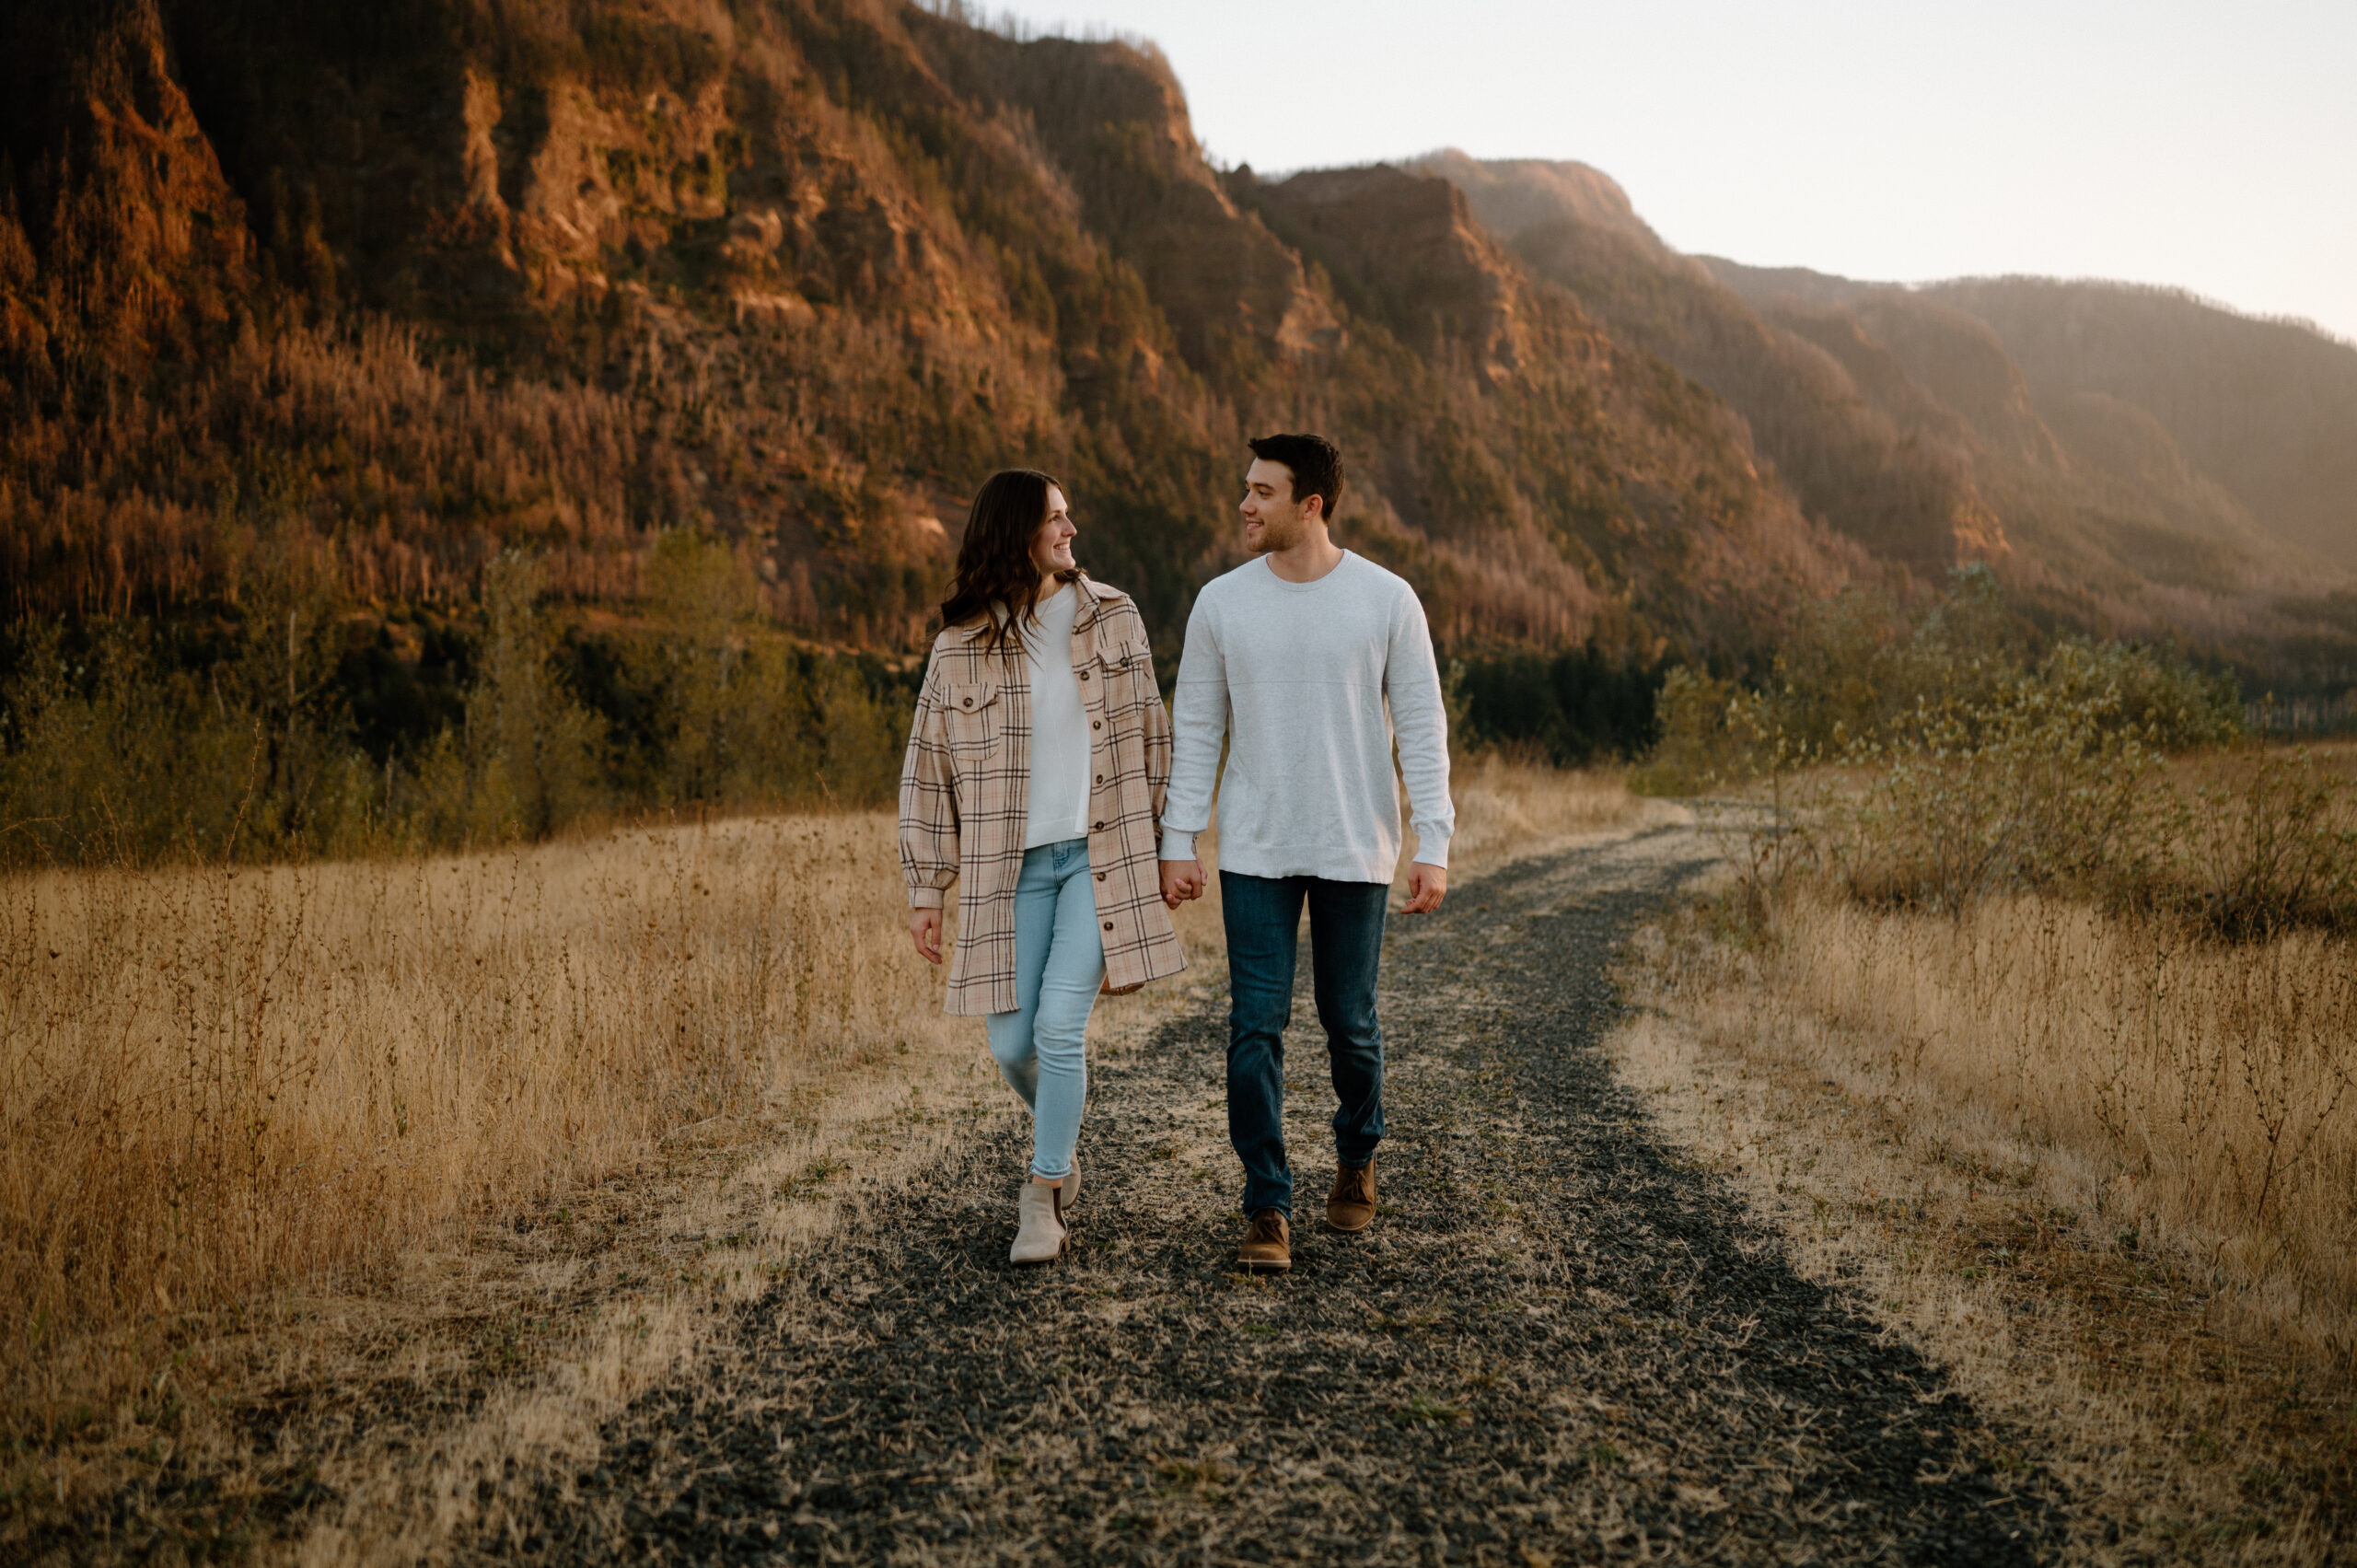 ancouver Wa Engagement Photos, Columbia River Gorge, Photo locations, Golden hour, Sunset, Summer, Portland Or